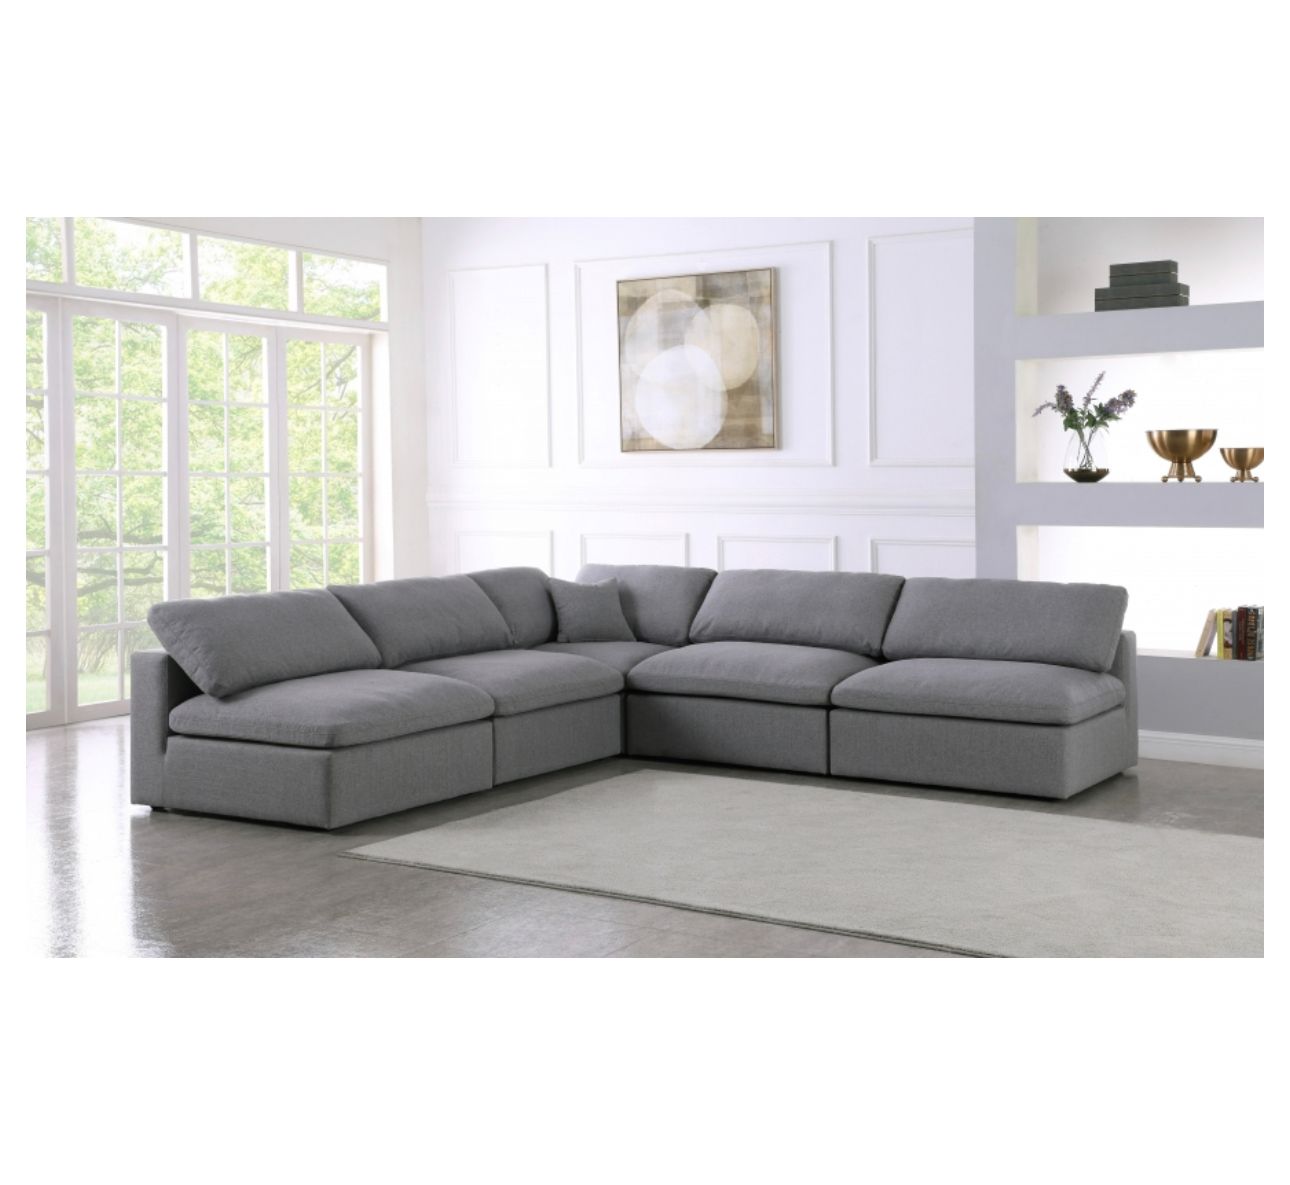 Open Box! Meridian Serene Deluxe Cloud  5 Piece Modular Sectional Sofa-Free Delivery